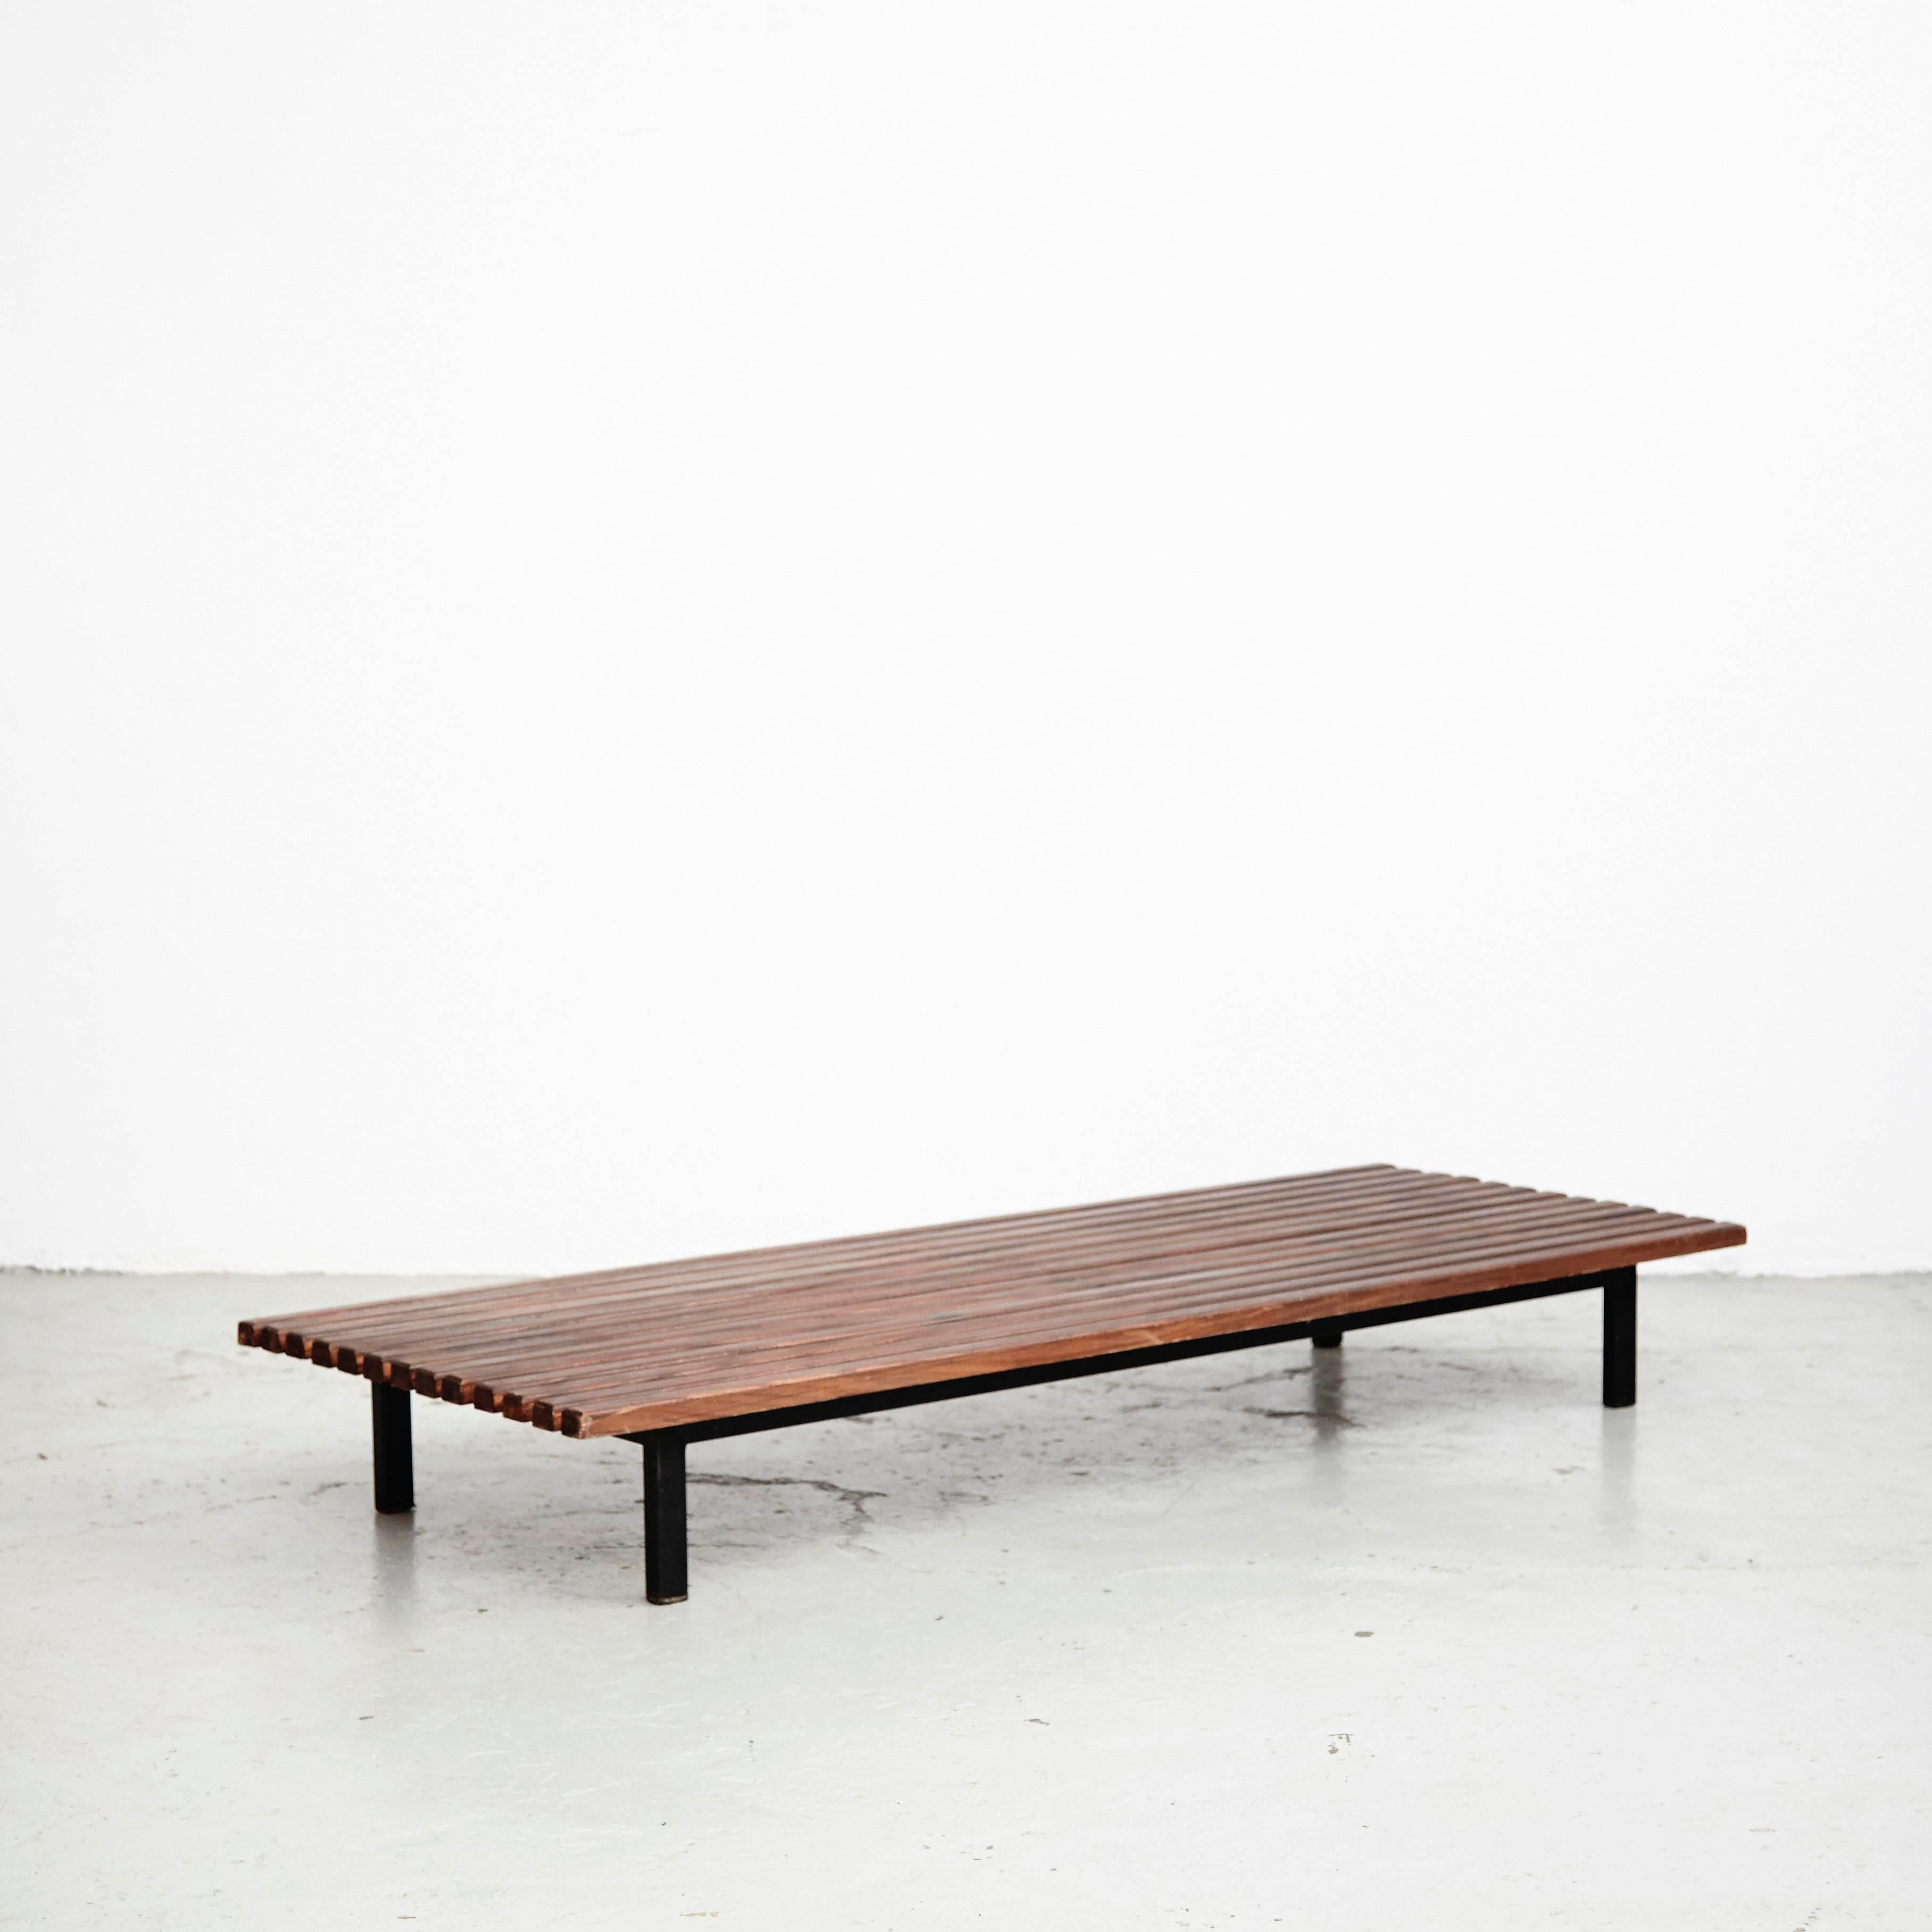 Bench designed by Charlotte Perriand, circa 1950.
Manufactured by Steph Simon (France) circa 1950.
Mahogany wood, laquered metal frame and legs.

Provenance: Cansado, Mauritania (Africa).

In good original condition, with minor wear consistent